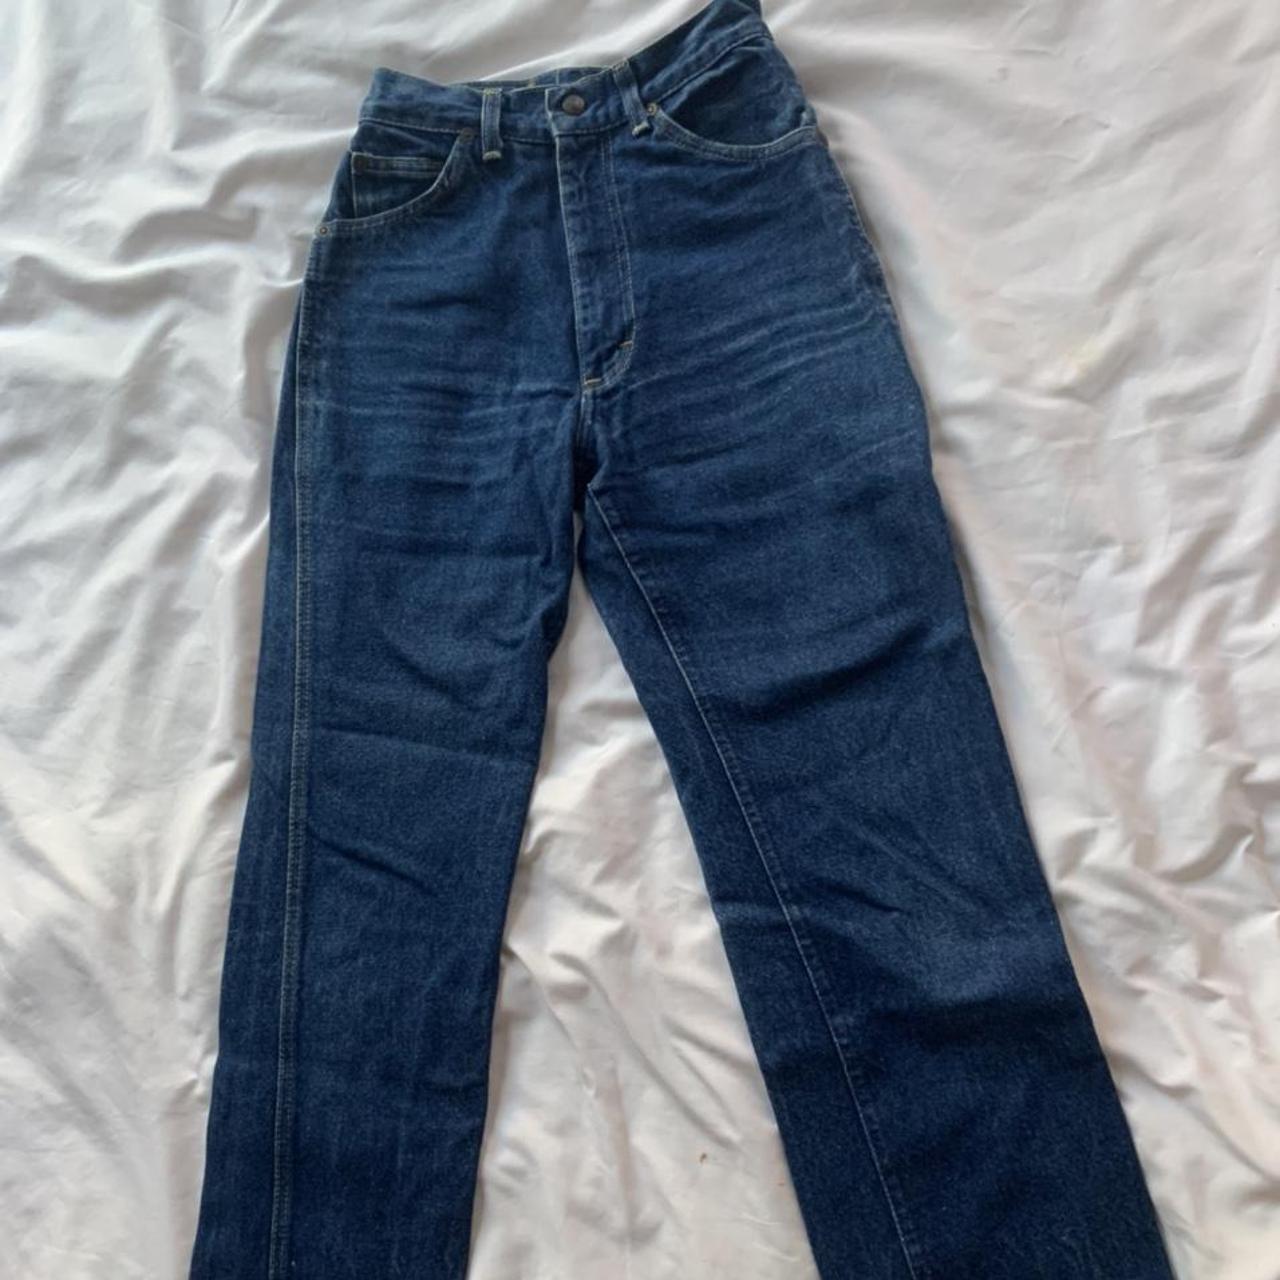 Vintage, perfectly worn in Lee jeans. These classic... - Depop